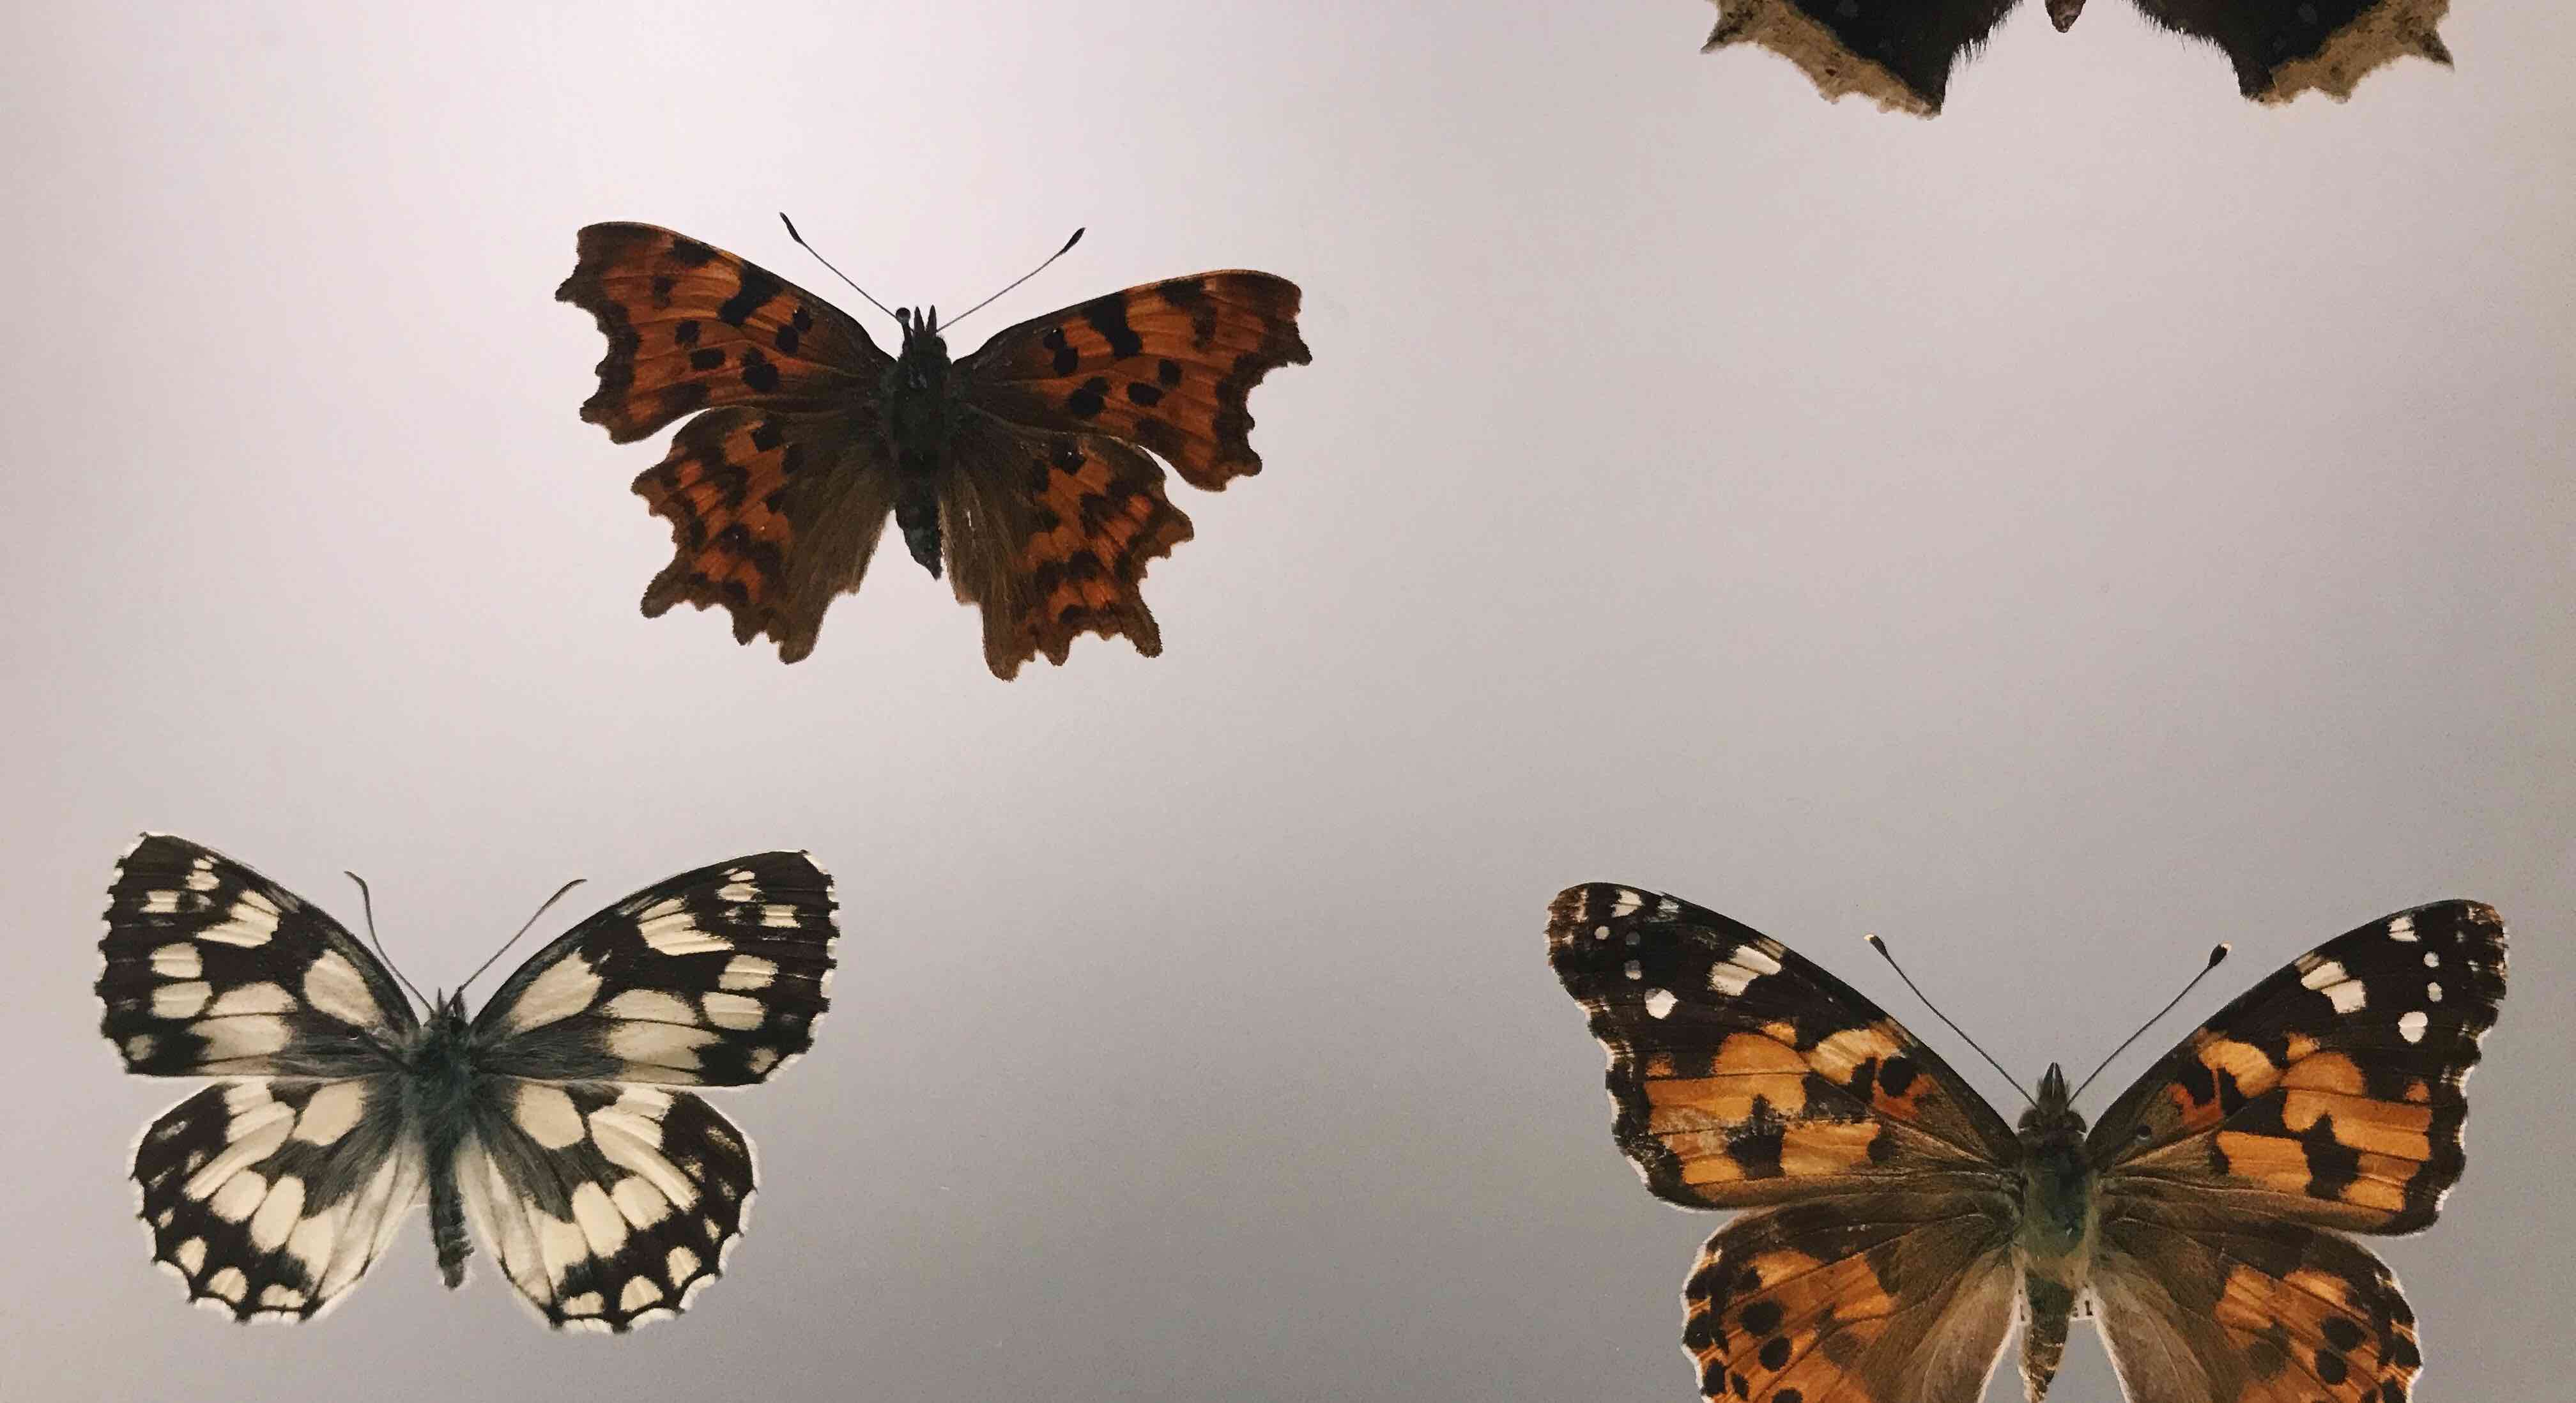 A butterfly with black  and white splotches and a butterfly with organge, black, and white splotches.